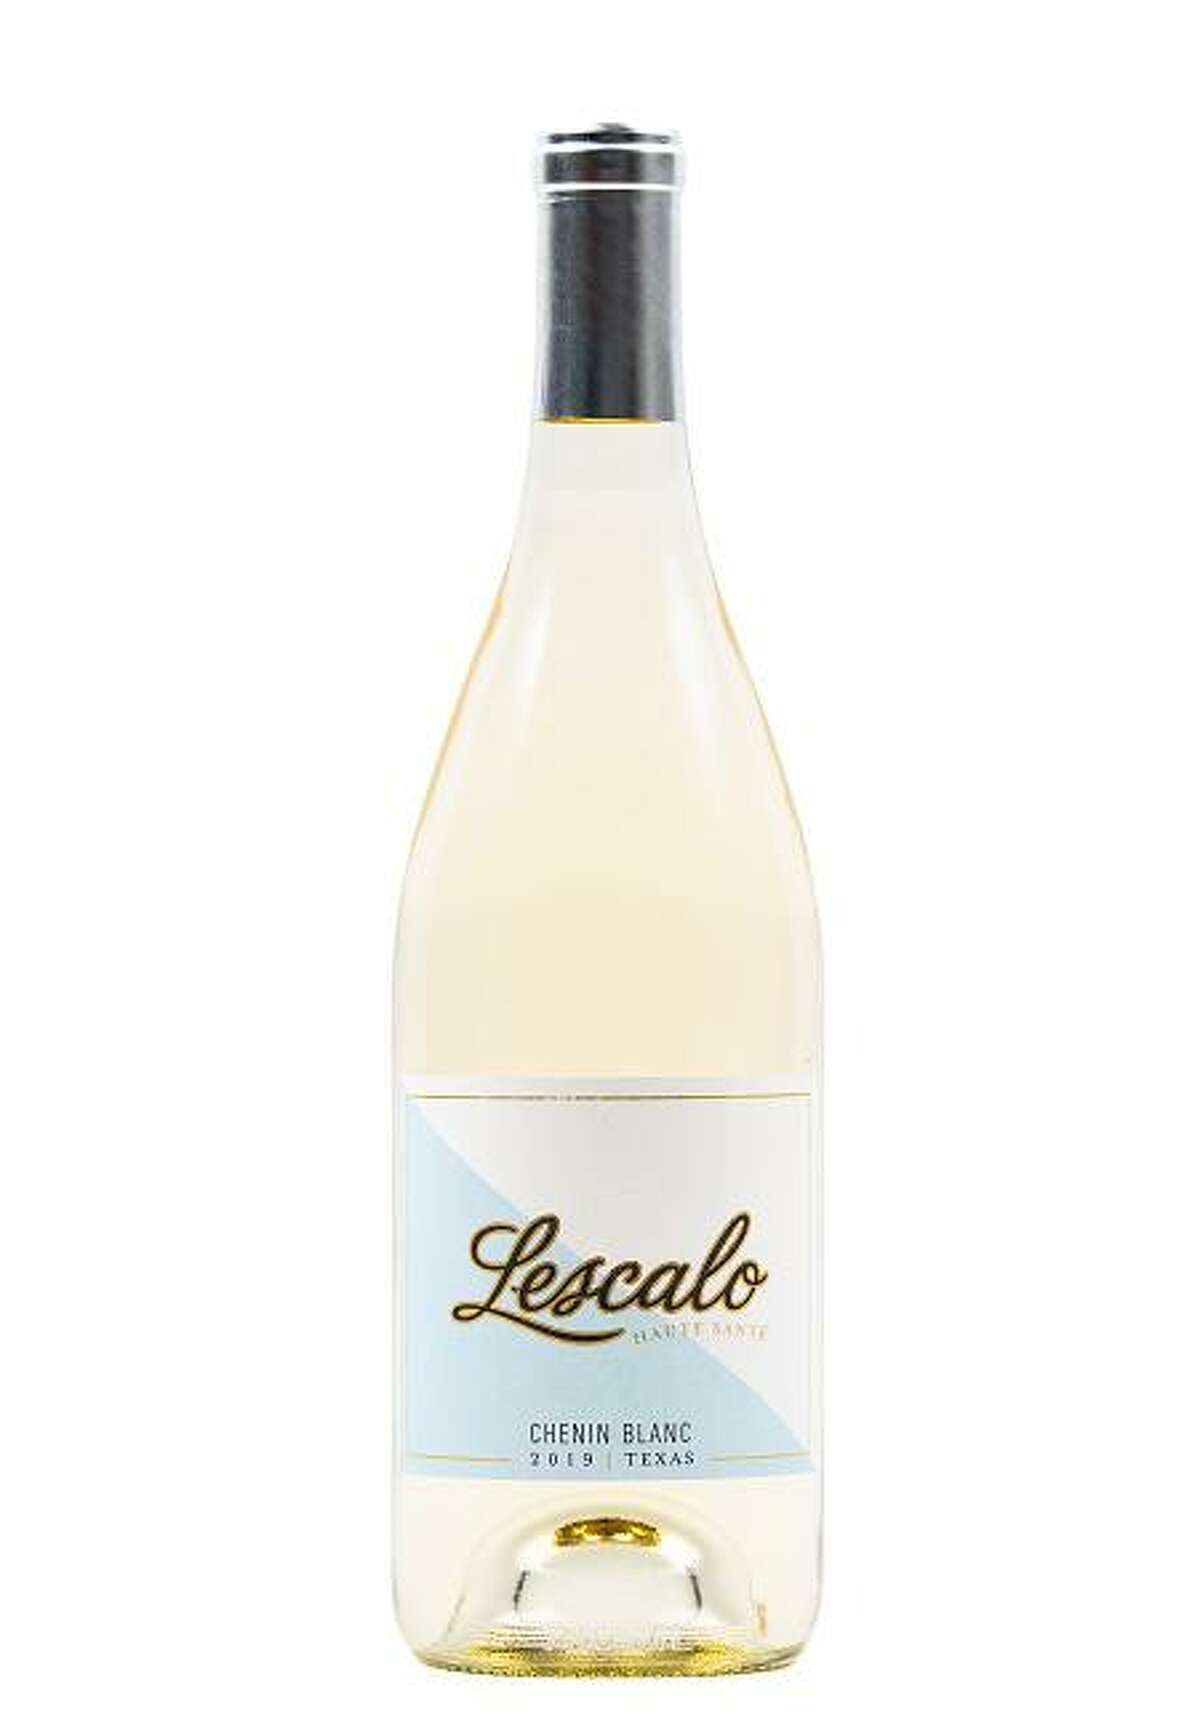 Susan Auler with Fall Creek Vineyard has found a way to make a low-calorie wine and with less alcohol. At 90 calories a glass, Fall Creek Vineyards Chenin Blanc Lescalo is a fruit-forward lovely warm weather sipper. It is designed for those who want to shed about 30 calories per glass of vino.